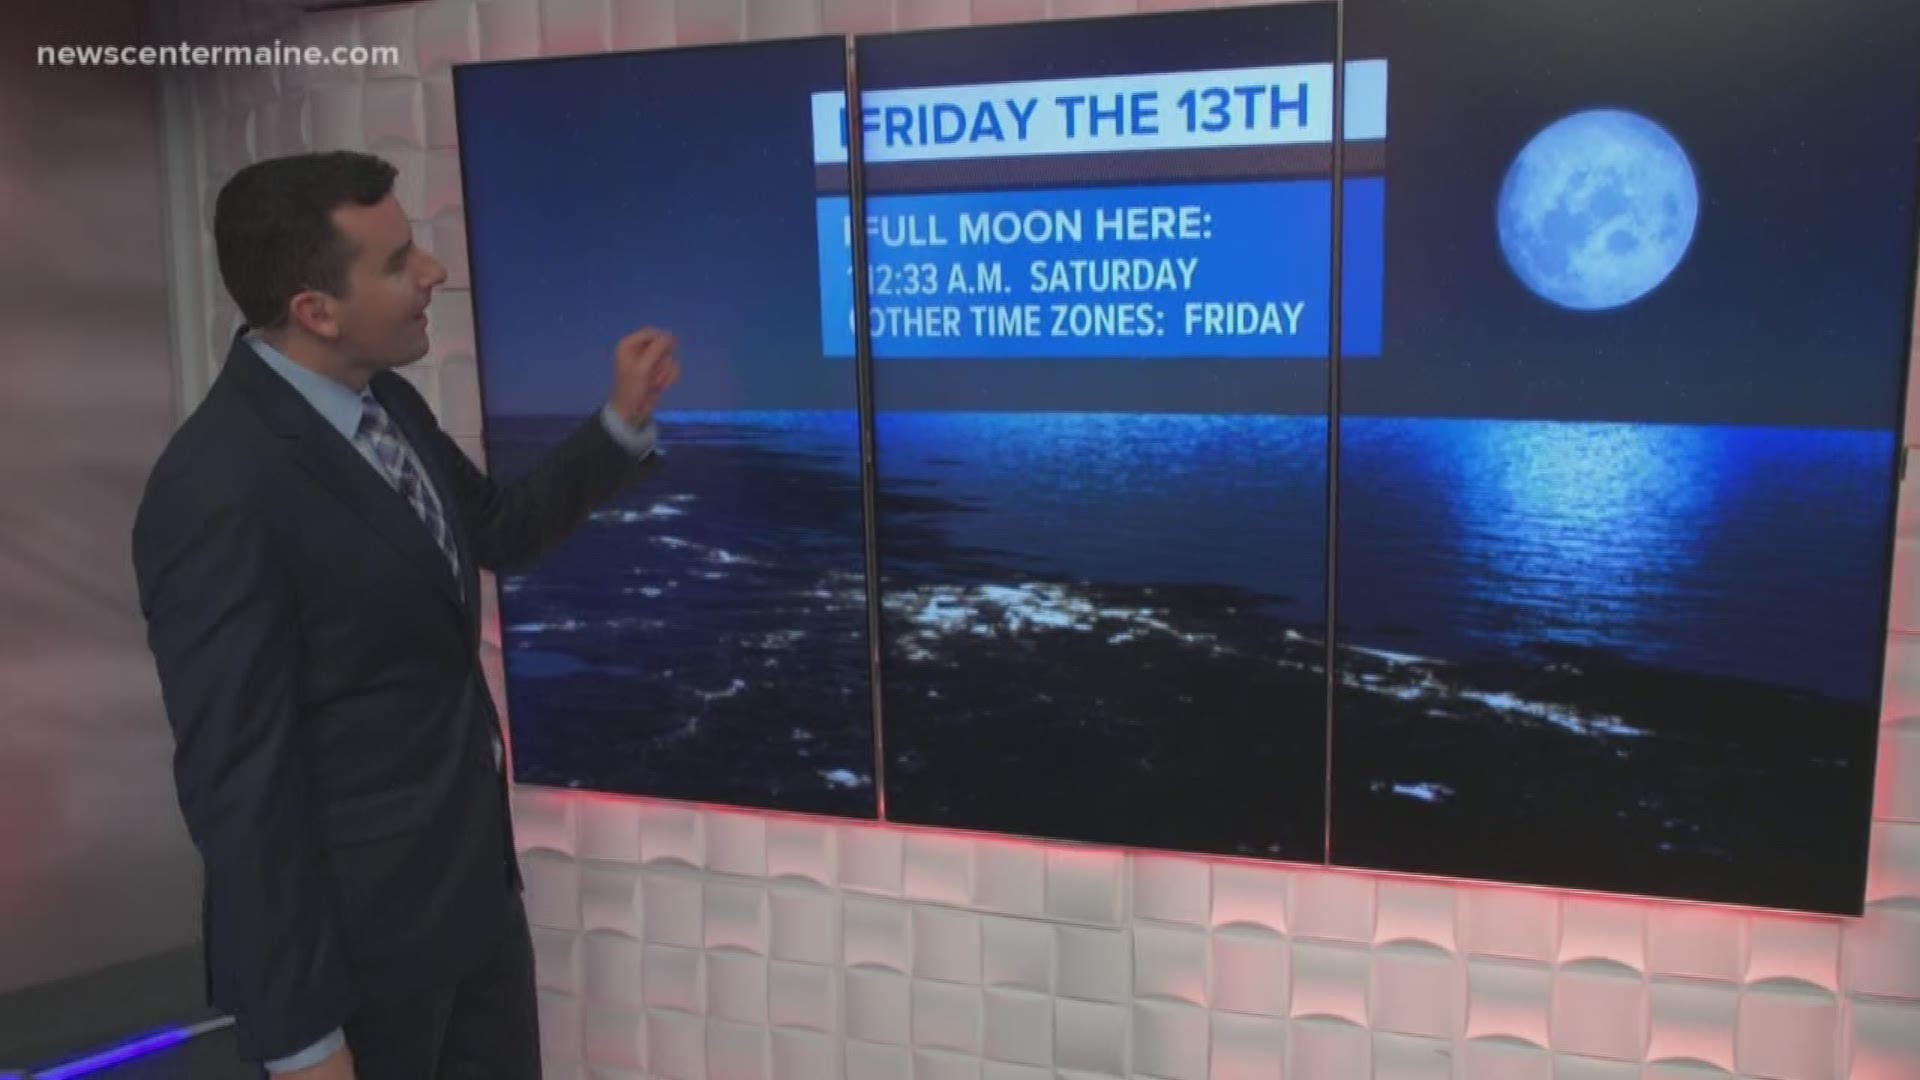 Meteorologist Ryan Breton breaks down the statistics of the convergence of a full moon and Friday the 13th that will happen this week.